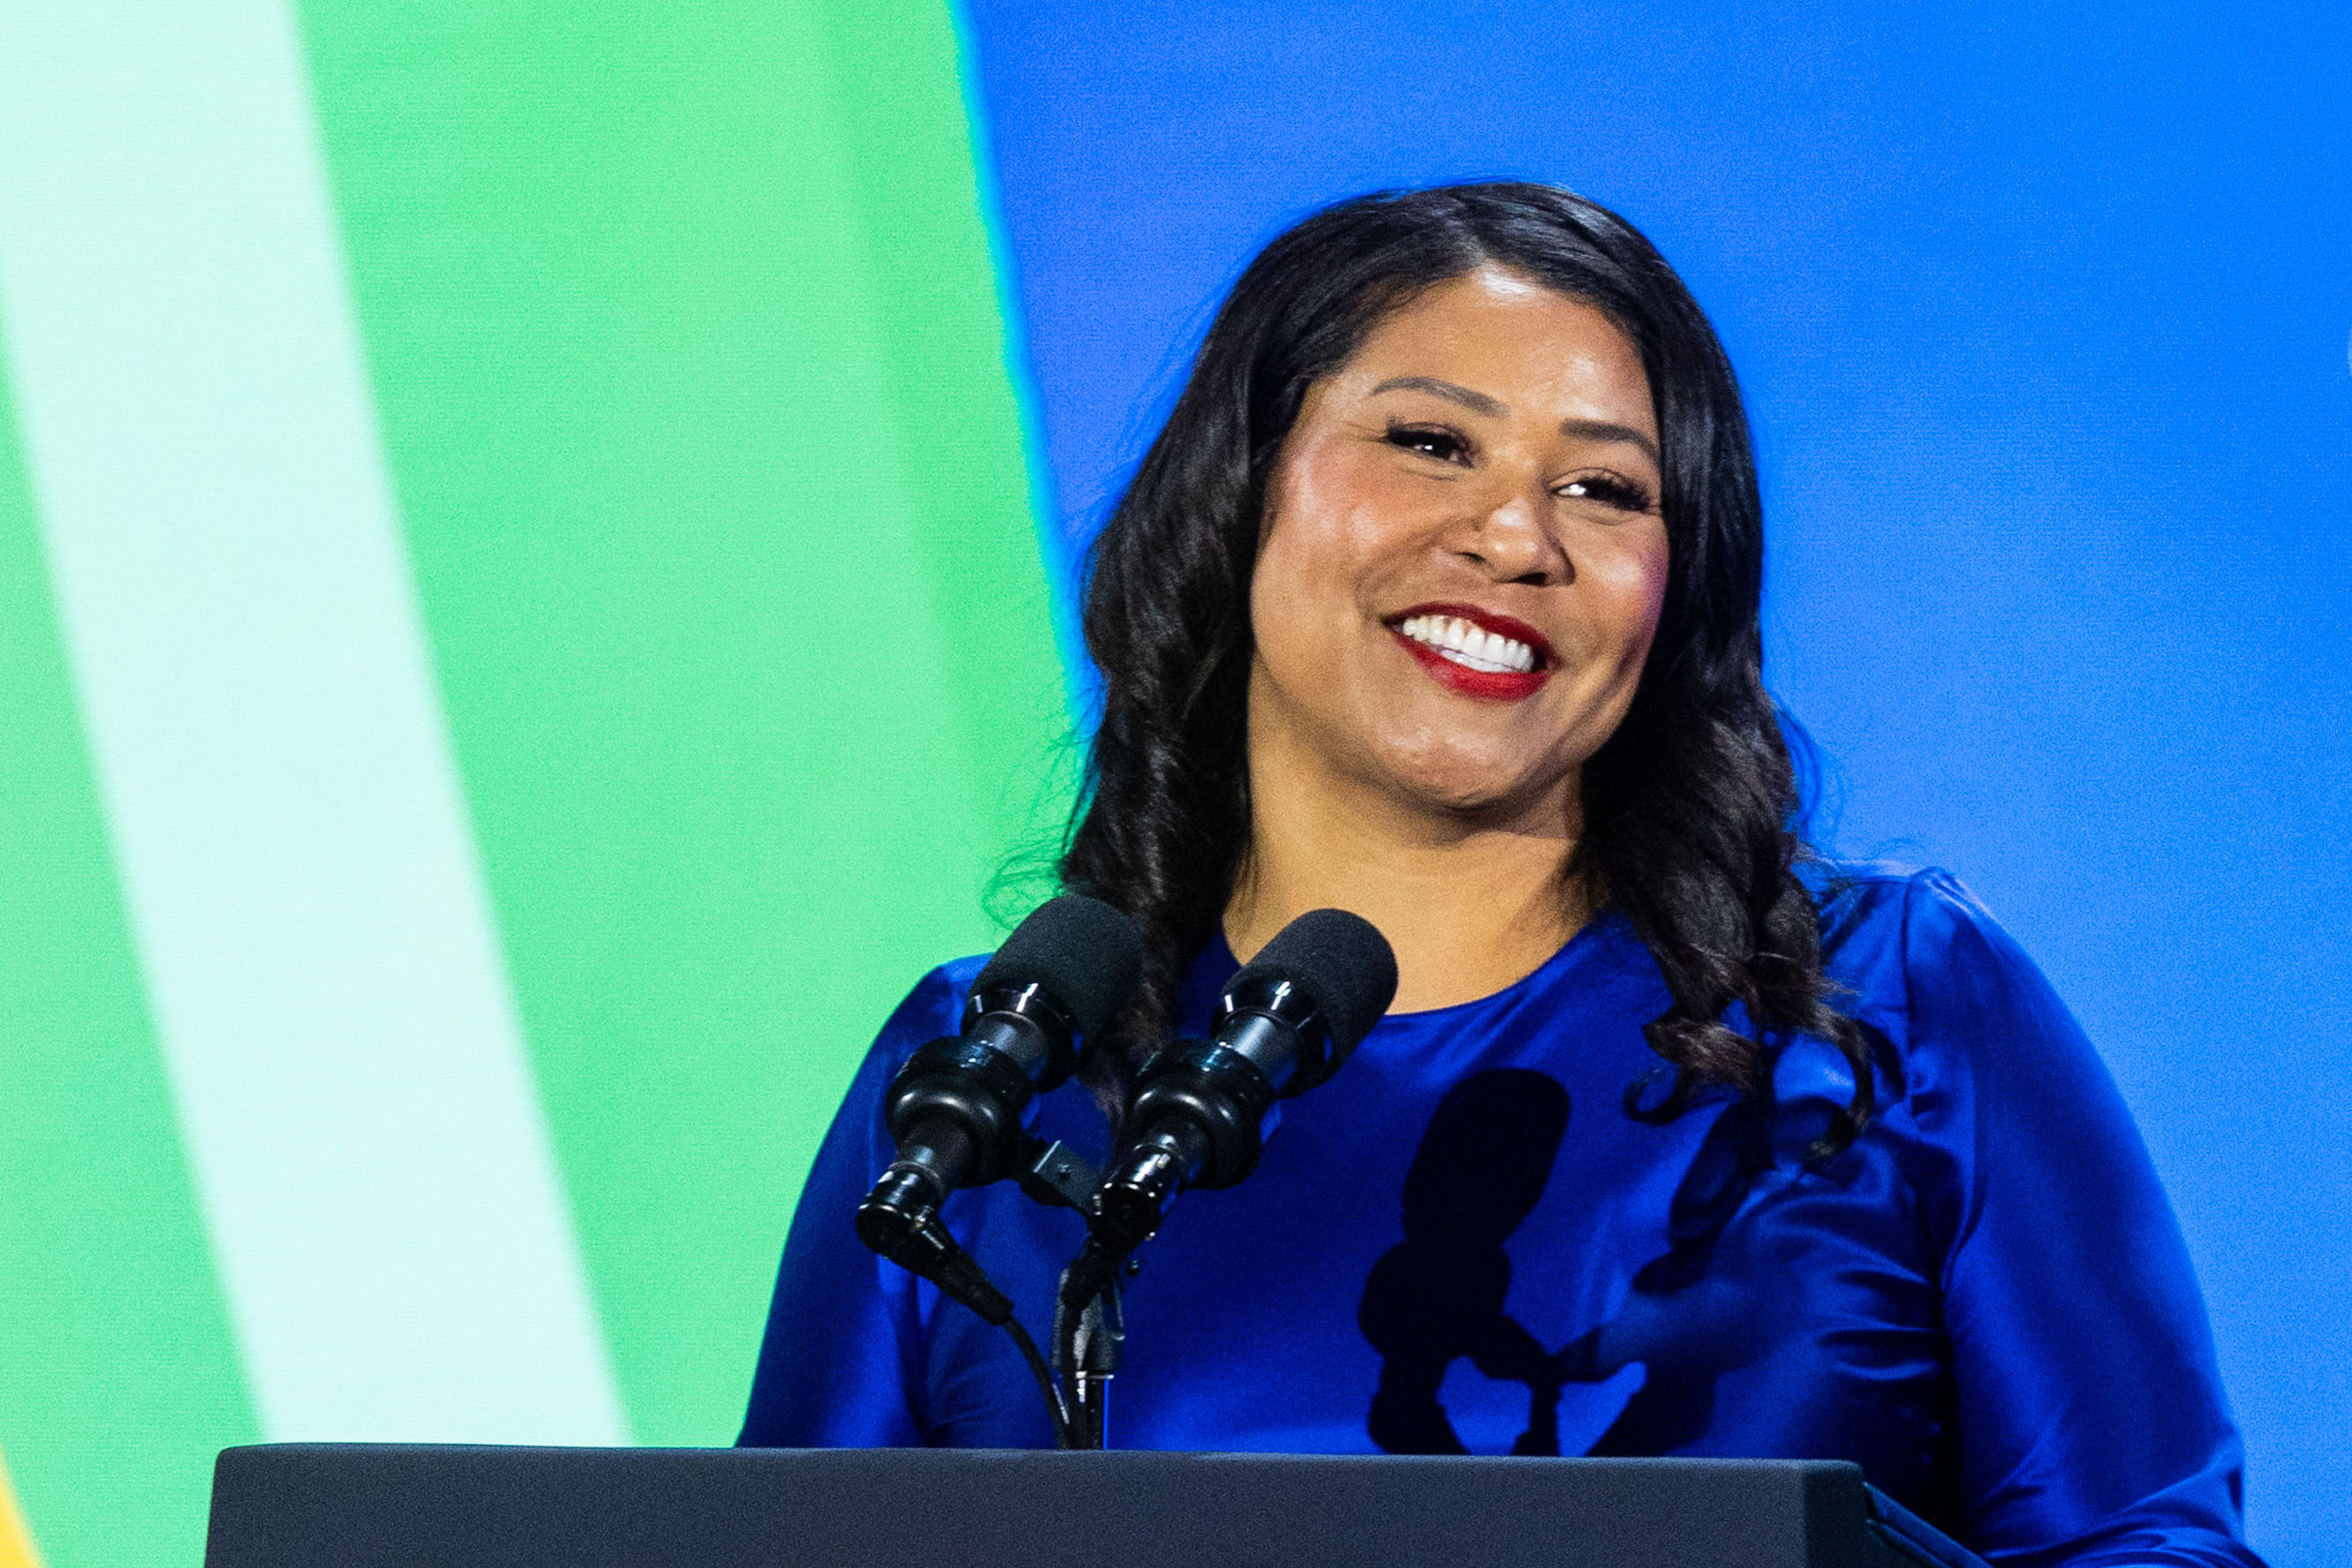 Woman smiles while speaking into microphone in front of green and blue background